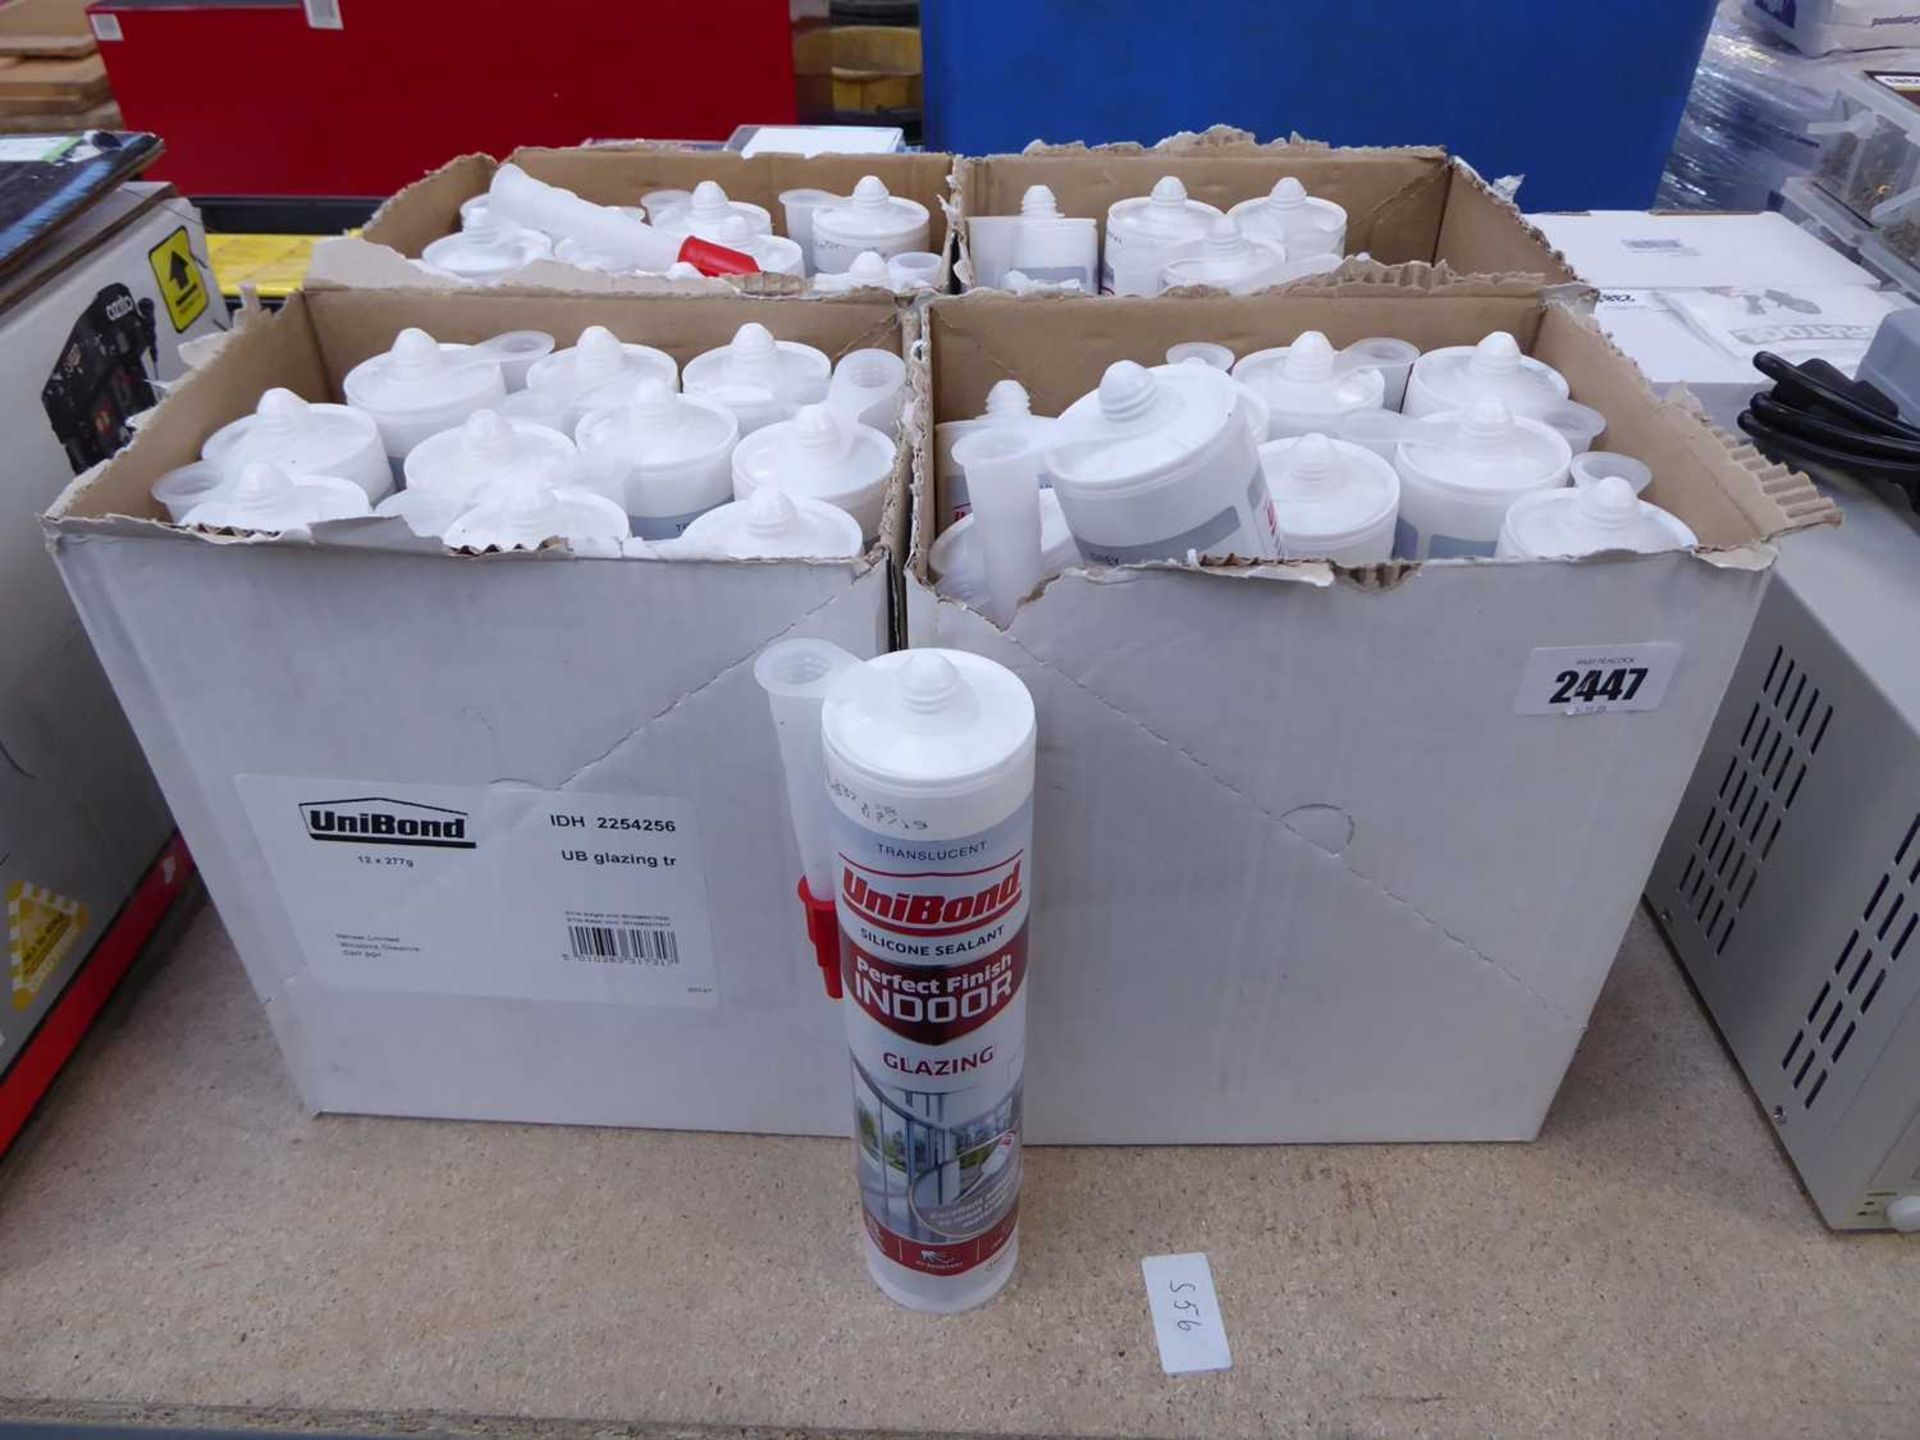 4 boxes containing approx. 30 277g tubes of unibond silicon sealant